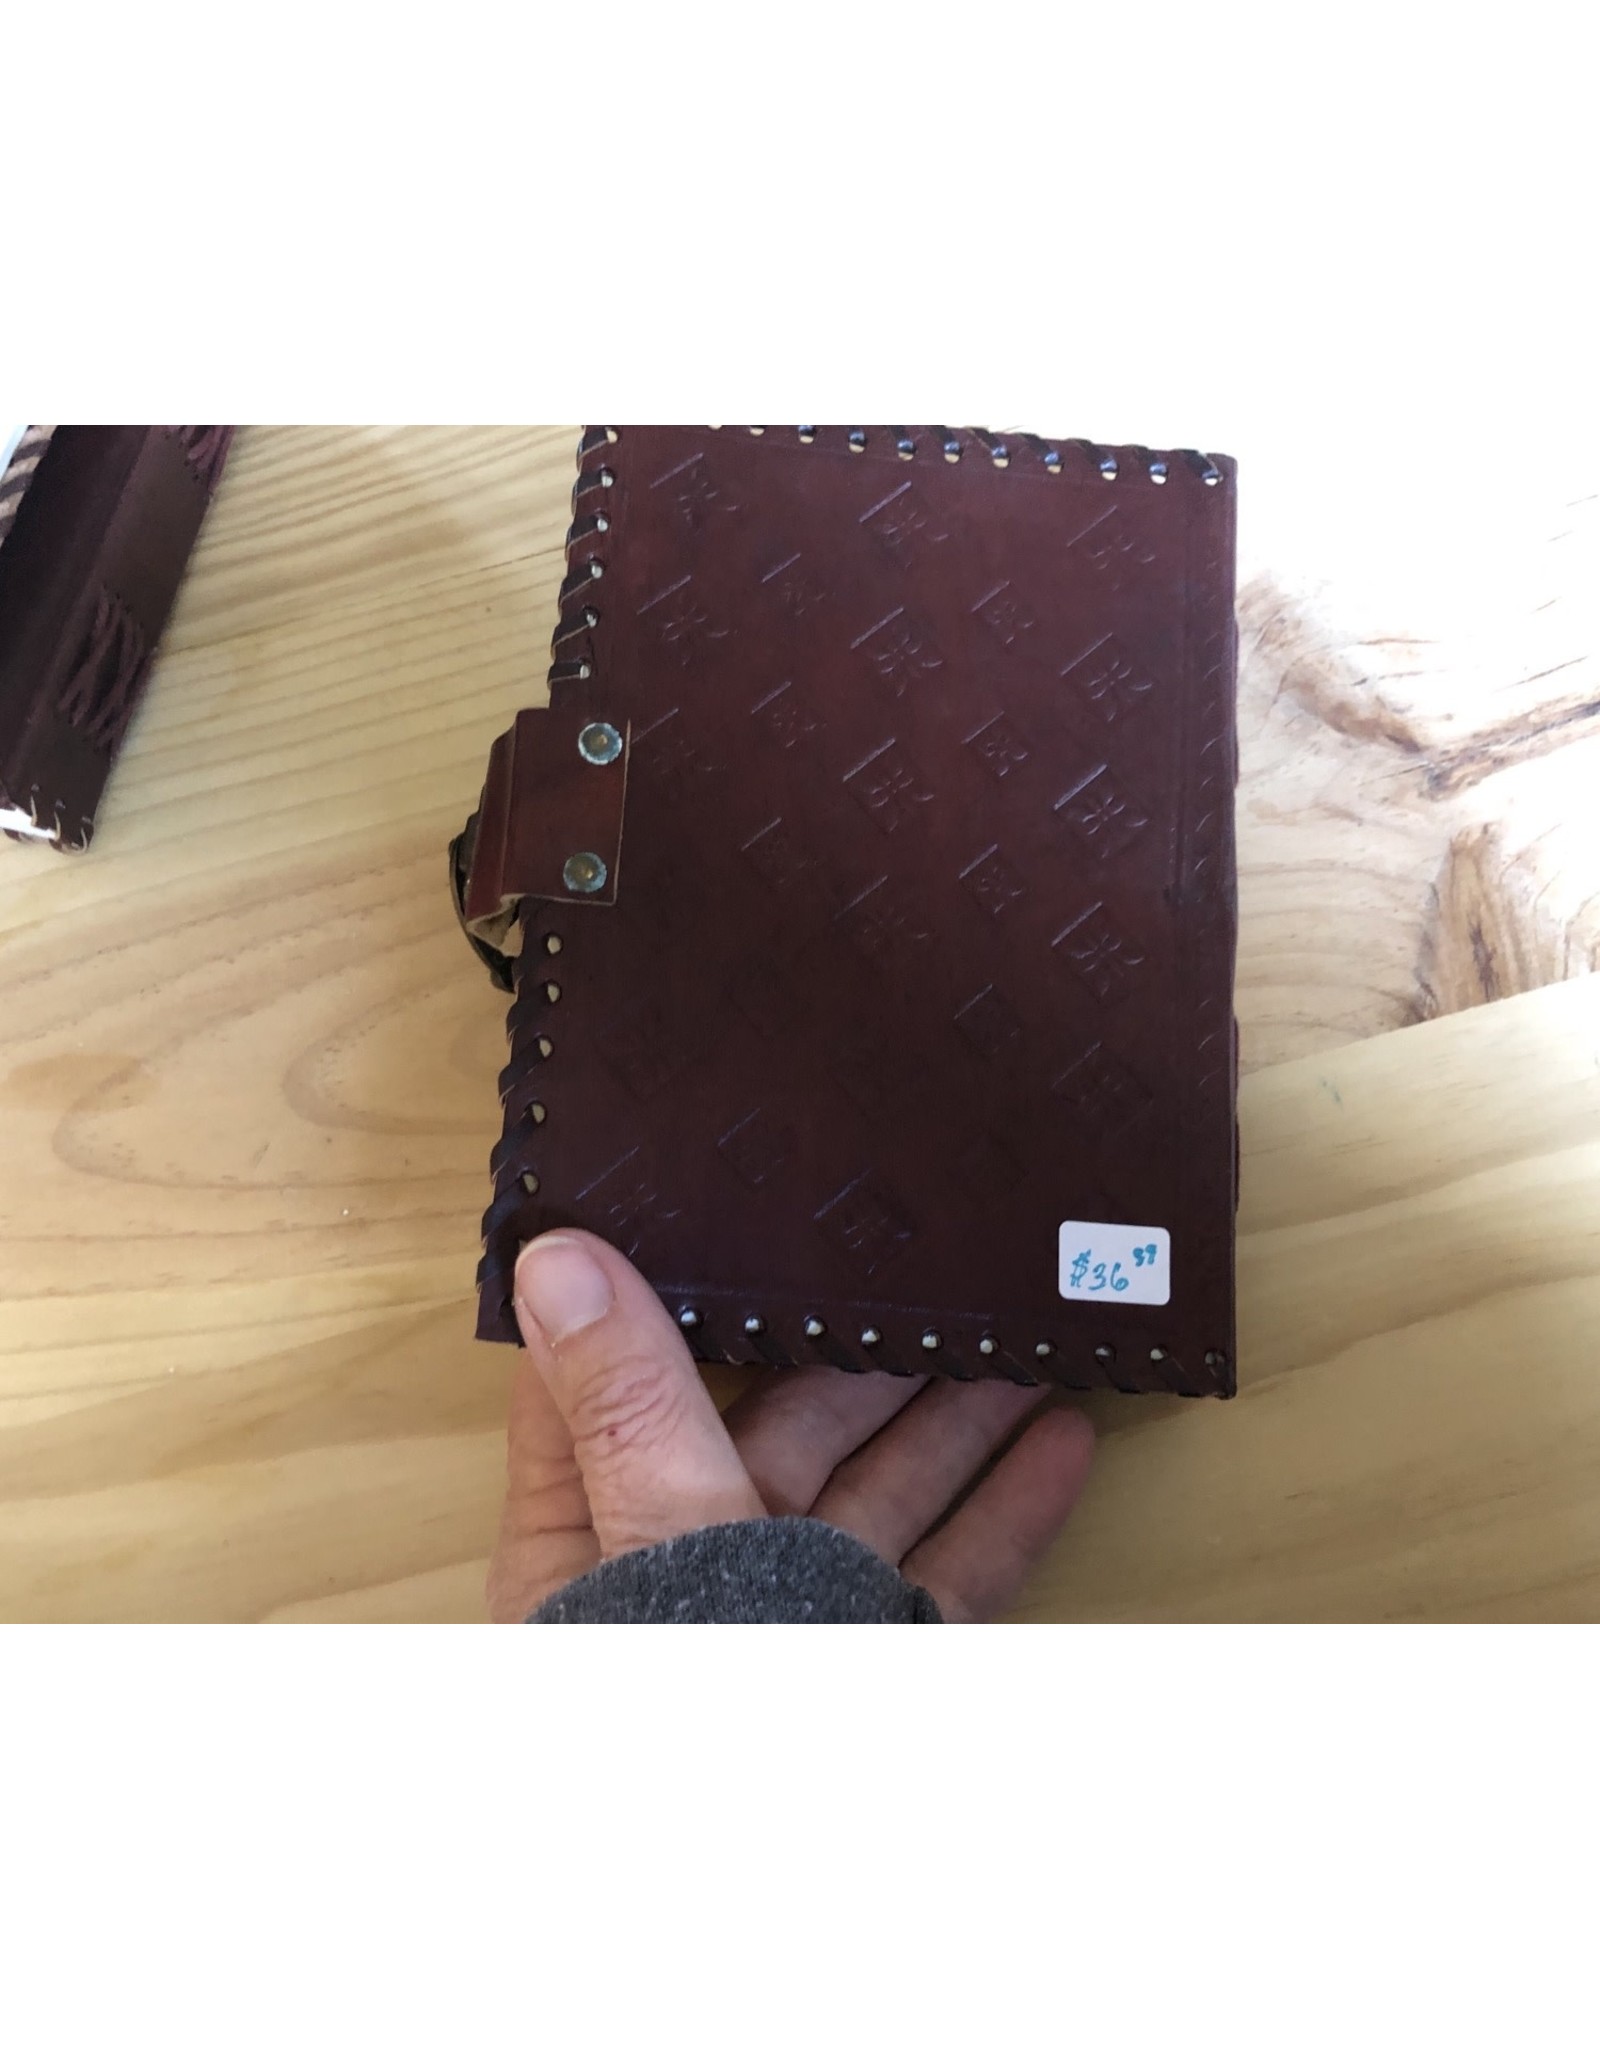 Tooled Leather Journal